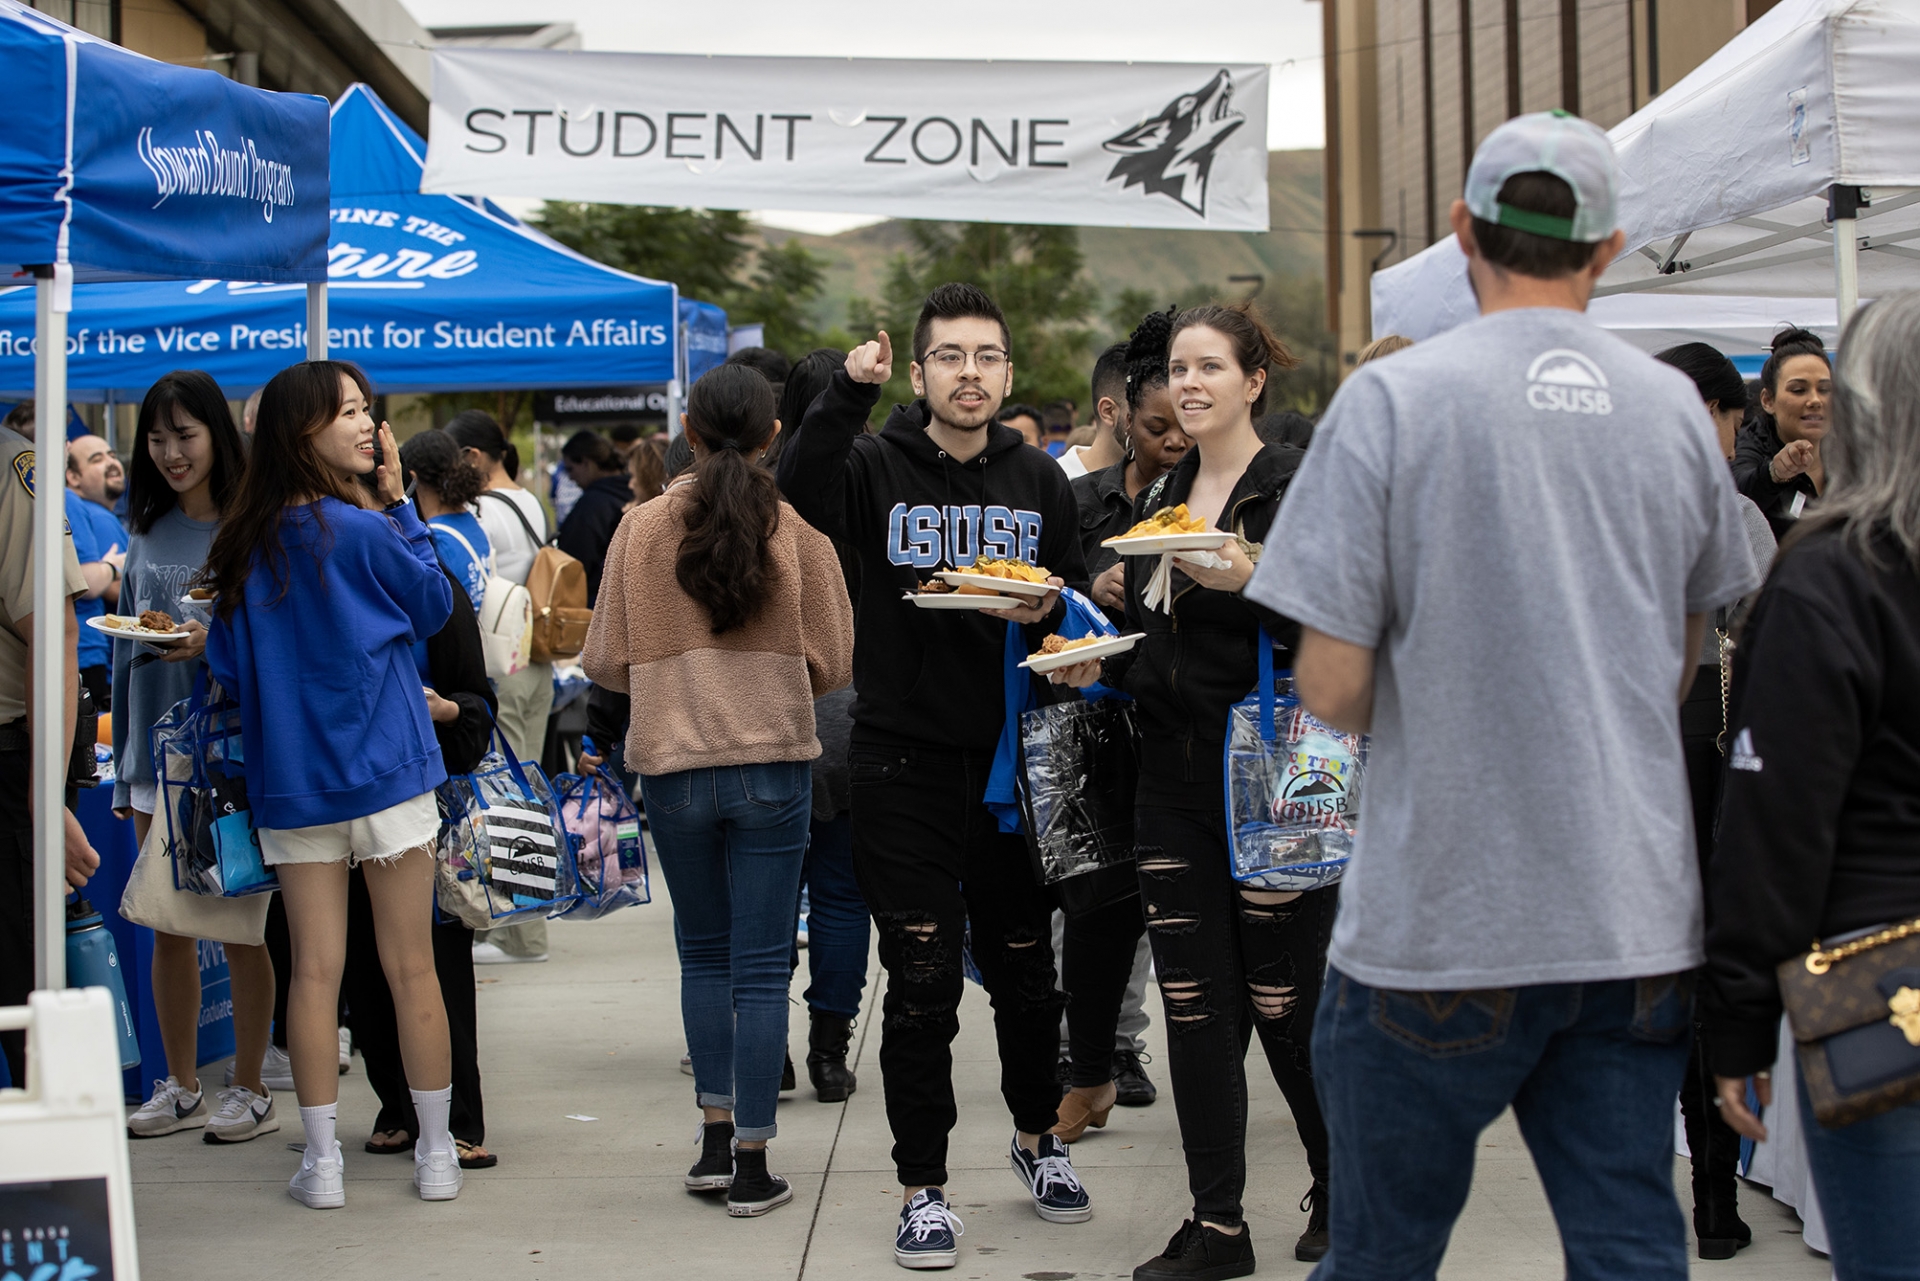 The Student Zone at Homecoming Bash